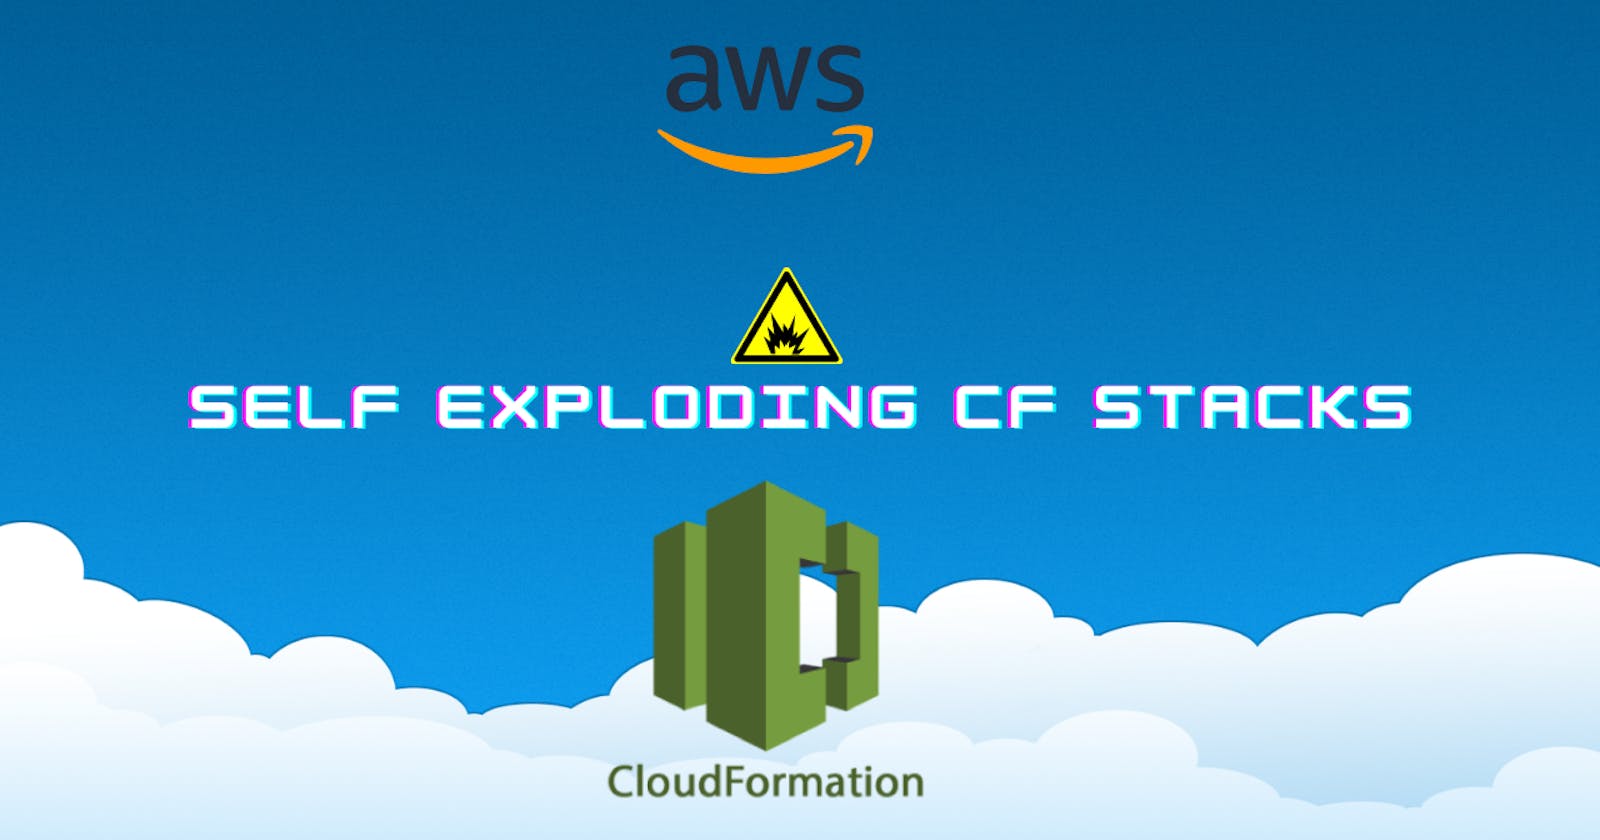 Self Exploding Cloudformation Stacks